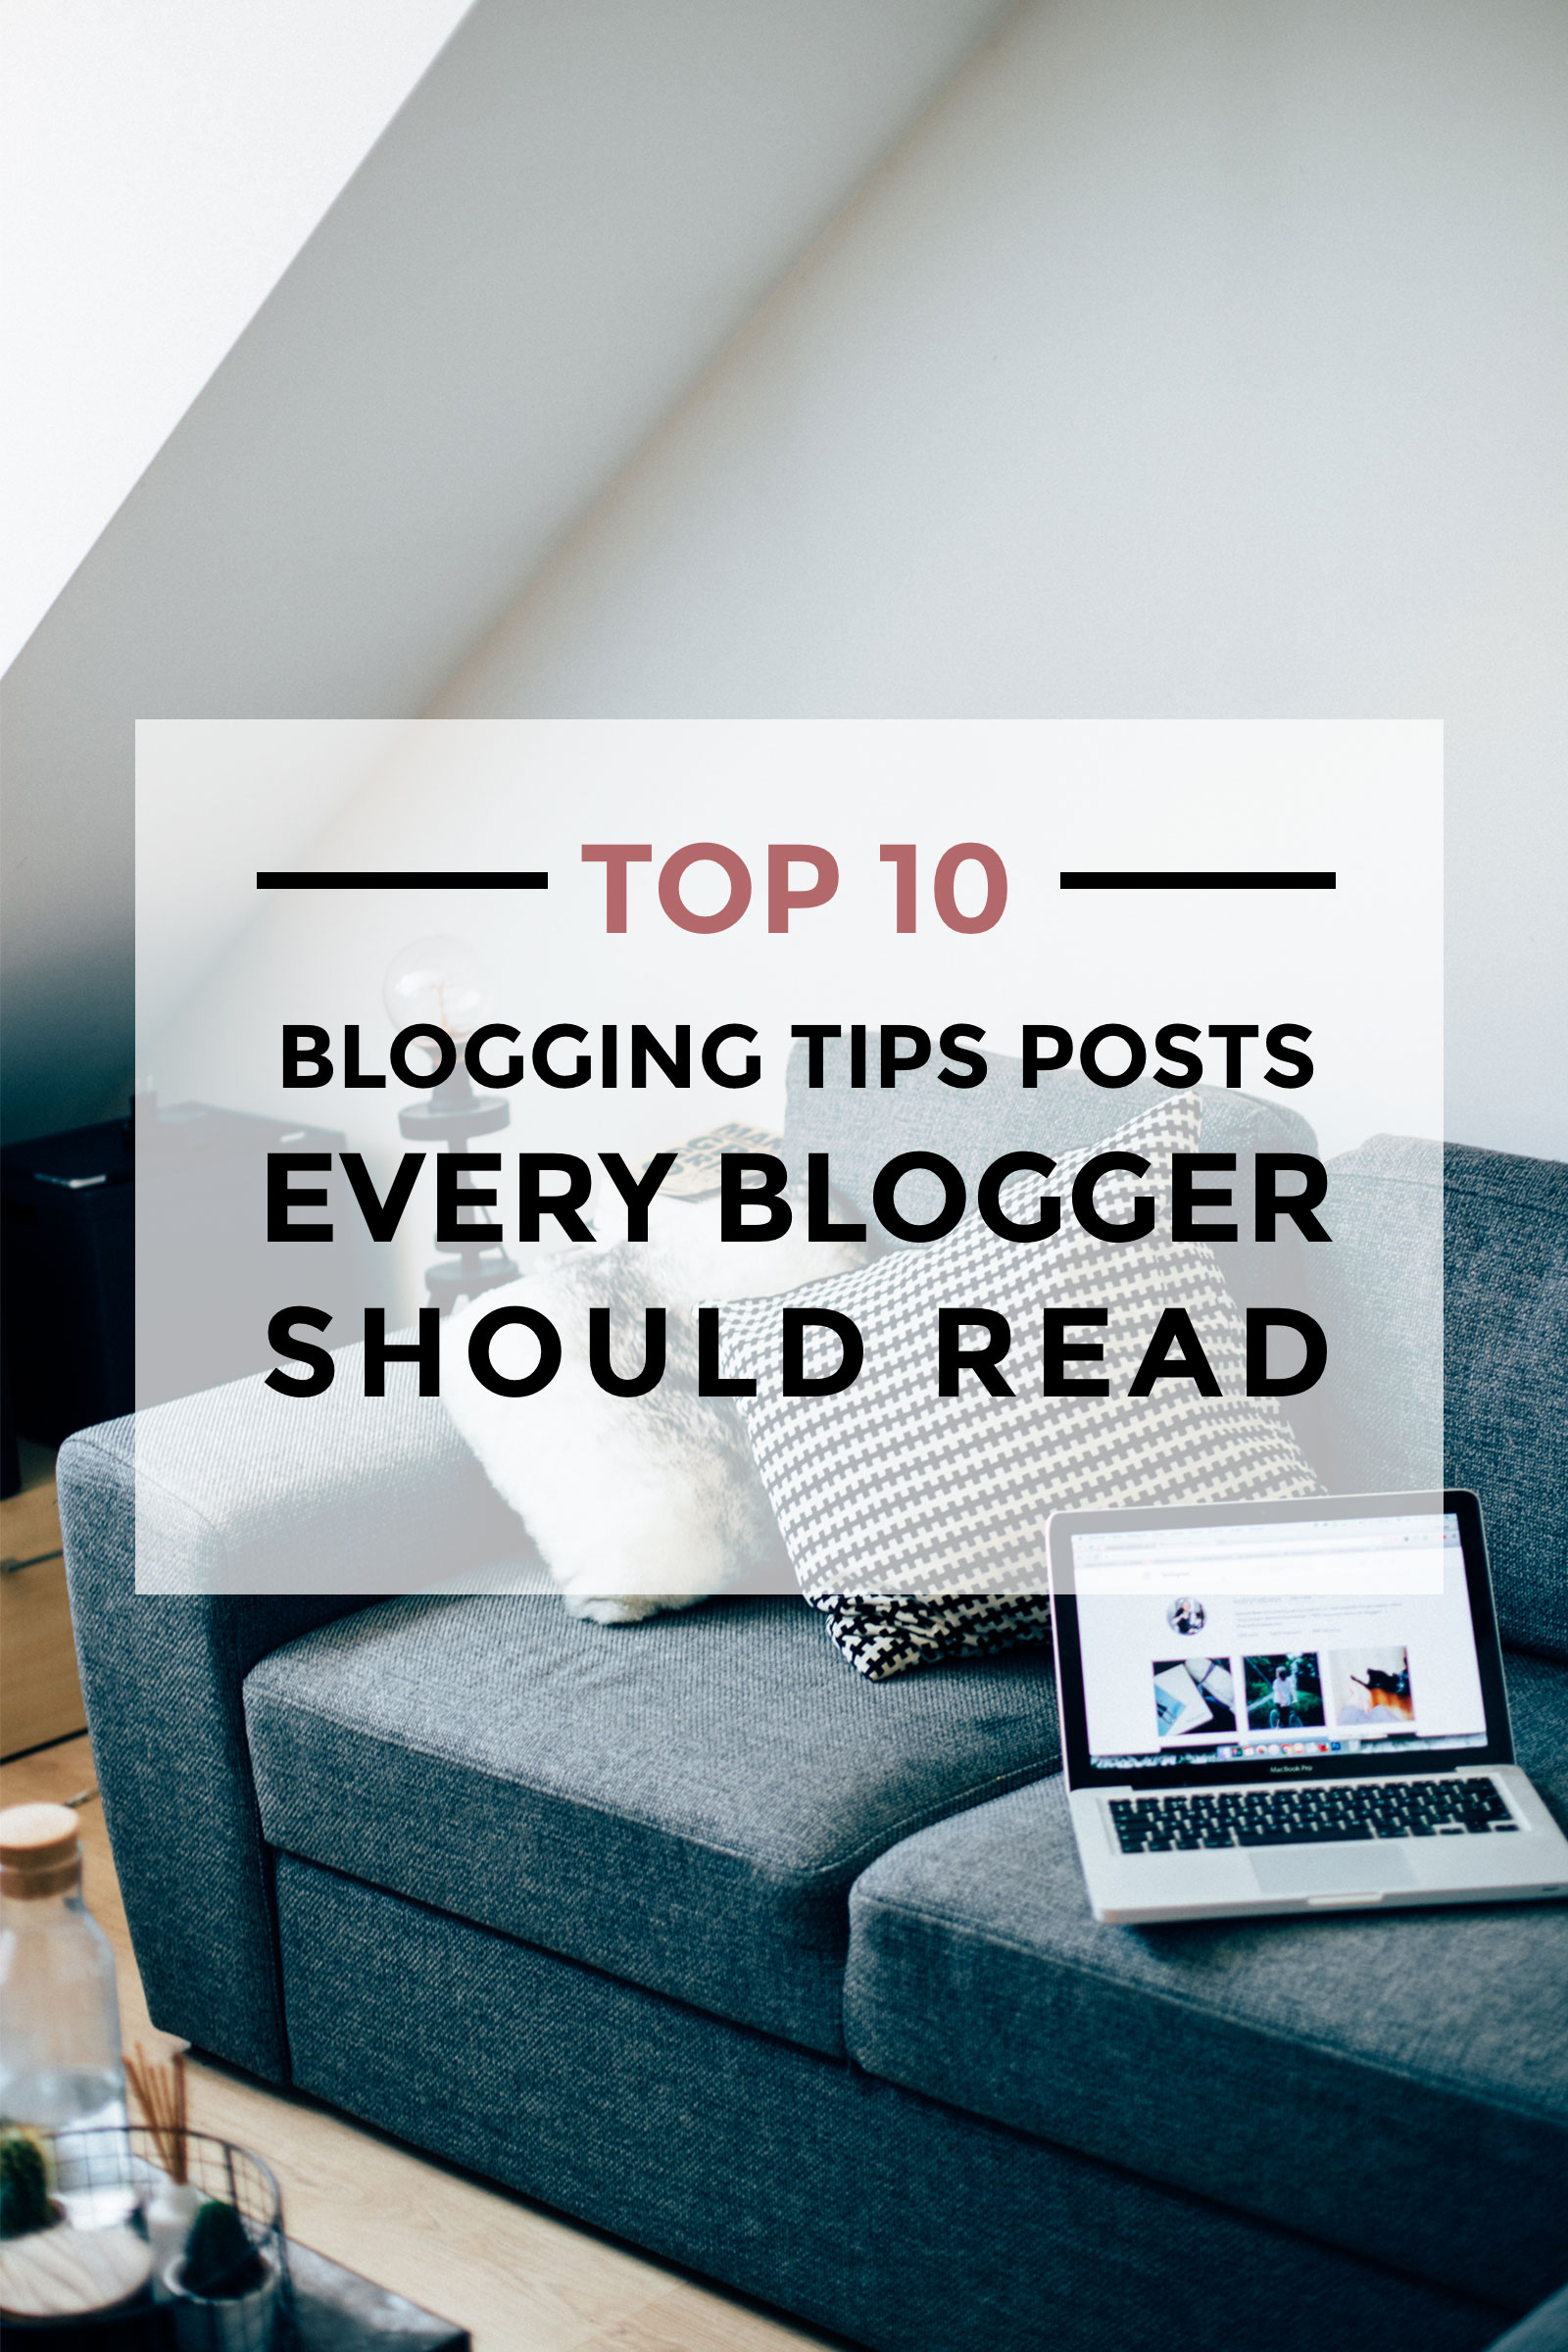 I've been sharing inspirational tips on growing your blog + biz for over a year now. I get emailed by newbie bloggers all the time asking for tips on starting, building & maintaining their online spaces. I love helping them out and I thought it would be a great idea to have all of my most popular blogging + business tips in one place, so it's easy for everyone to find and read. (blogging tips, business tips, posts for bloggers, improving your blog, 10 posts every blogger should read)